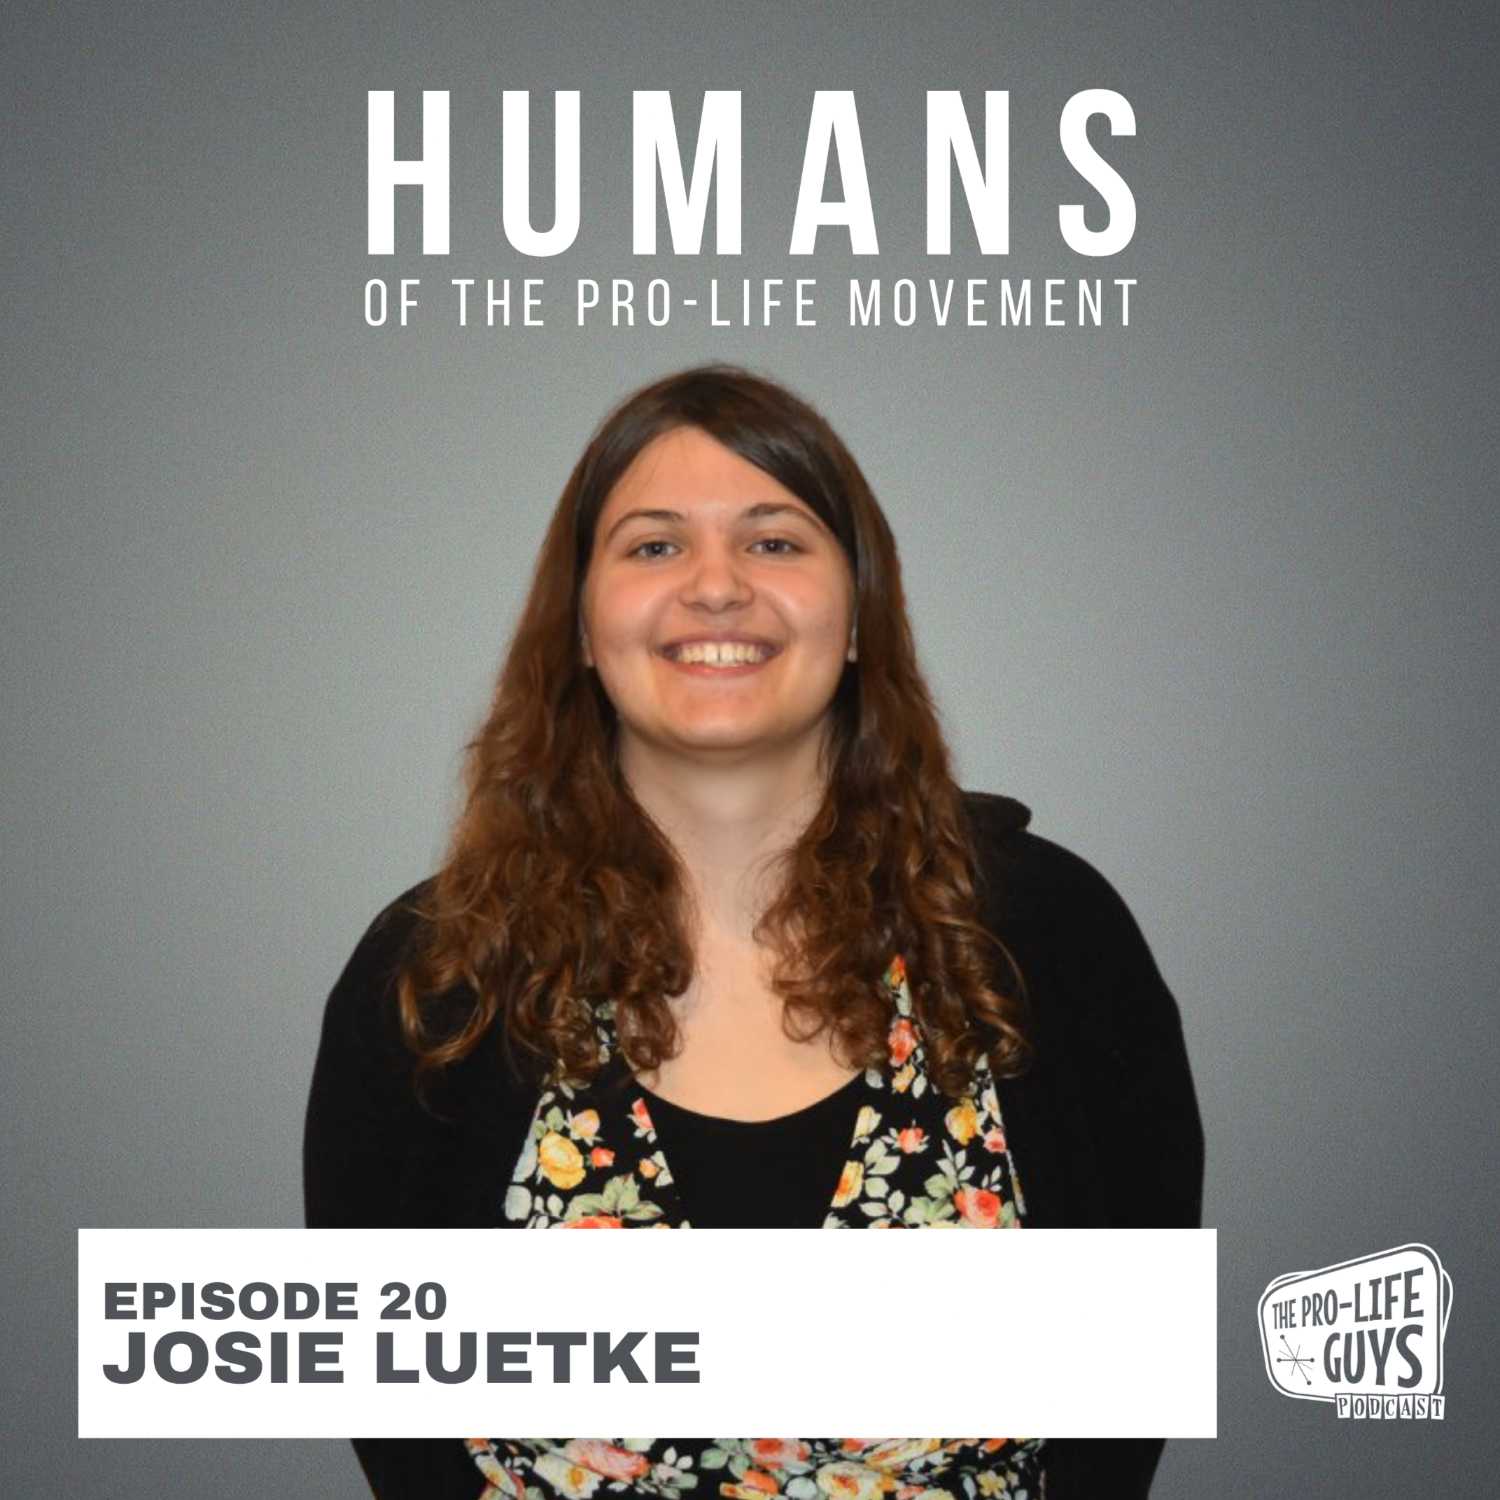 HPLM 20: From Pro-life Youth to Supporting Pro-Life Youth | Josie Luetke